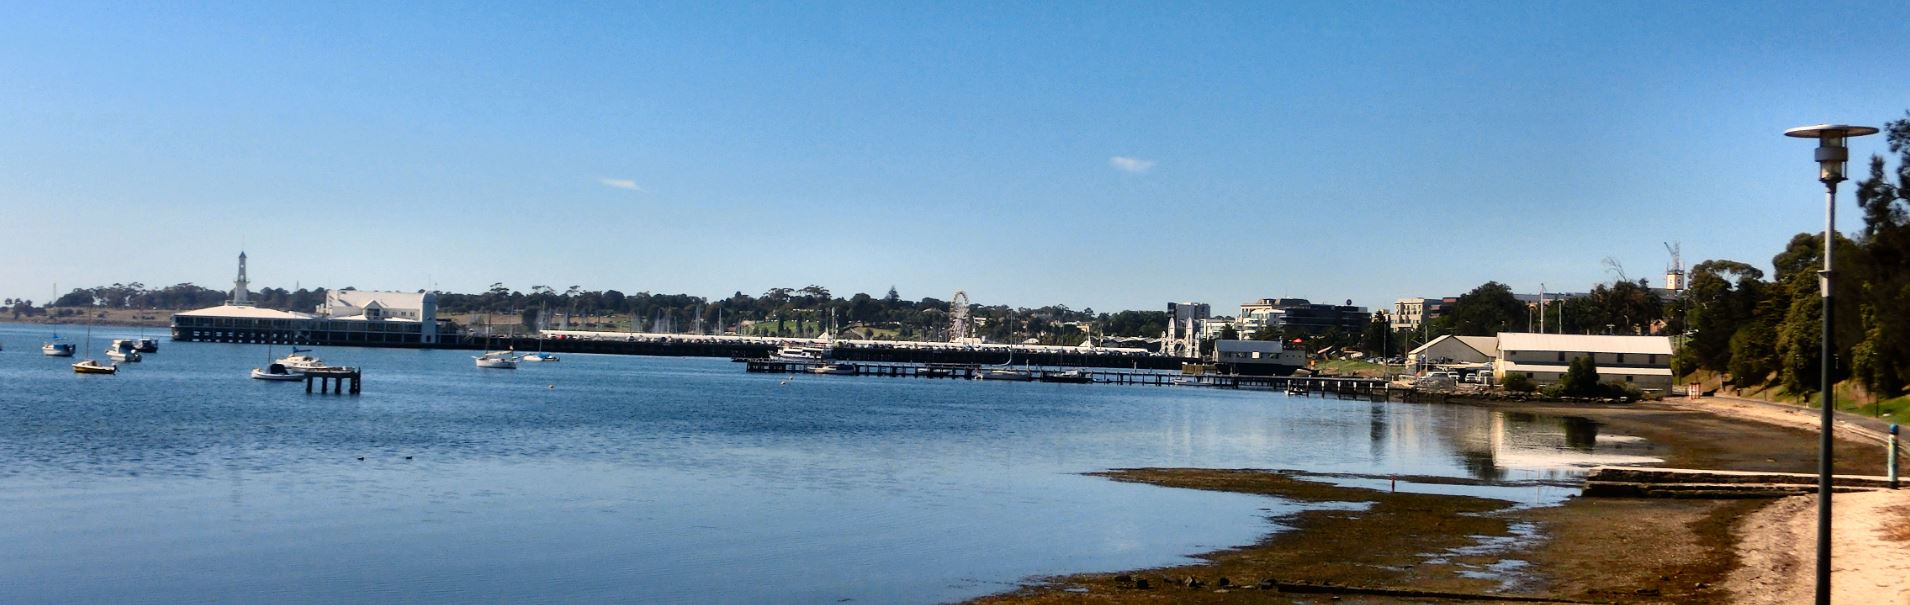 Geelong harbour and pier